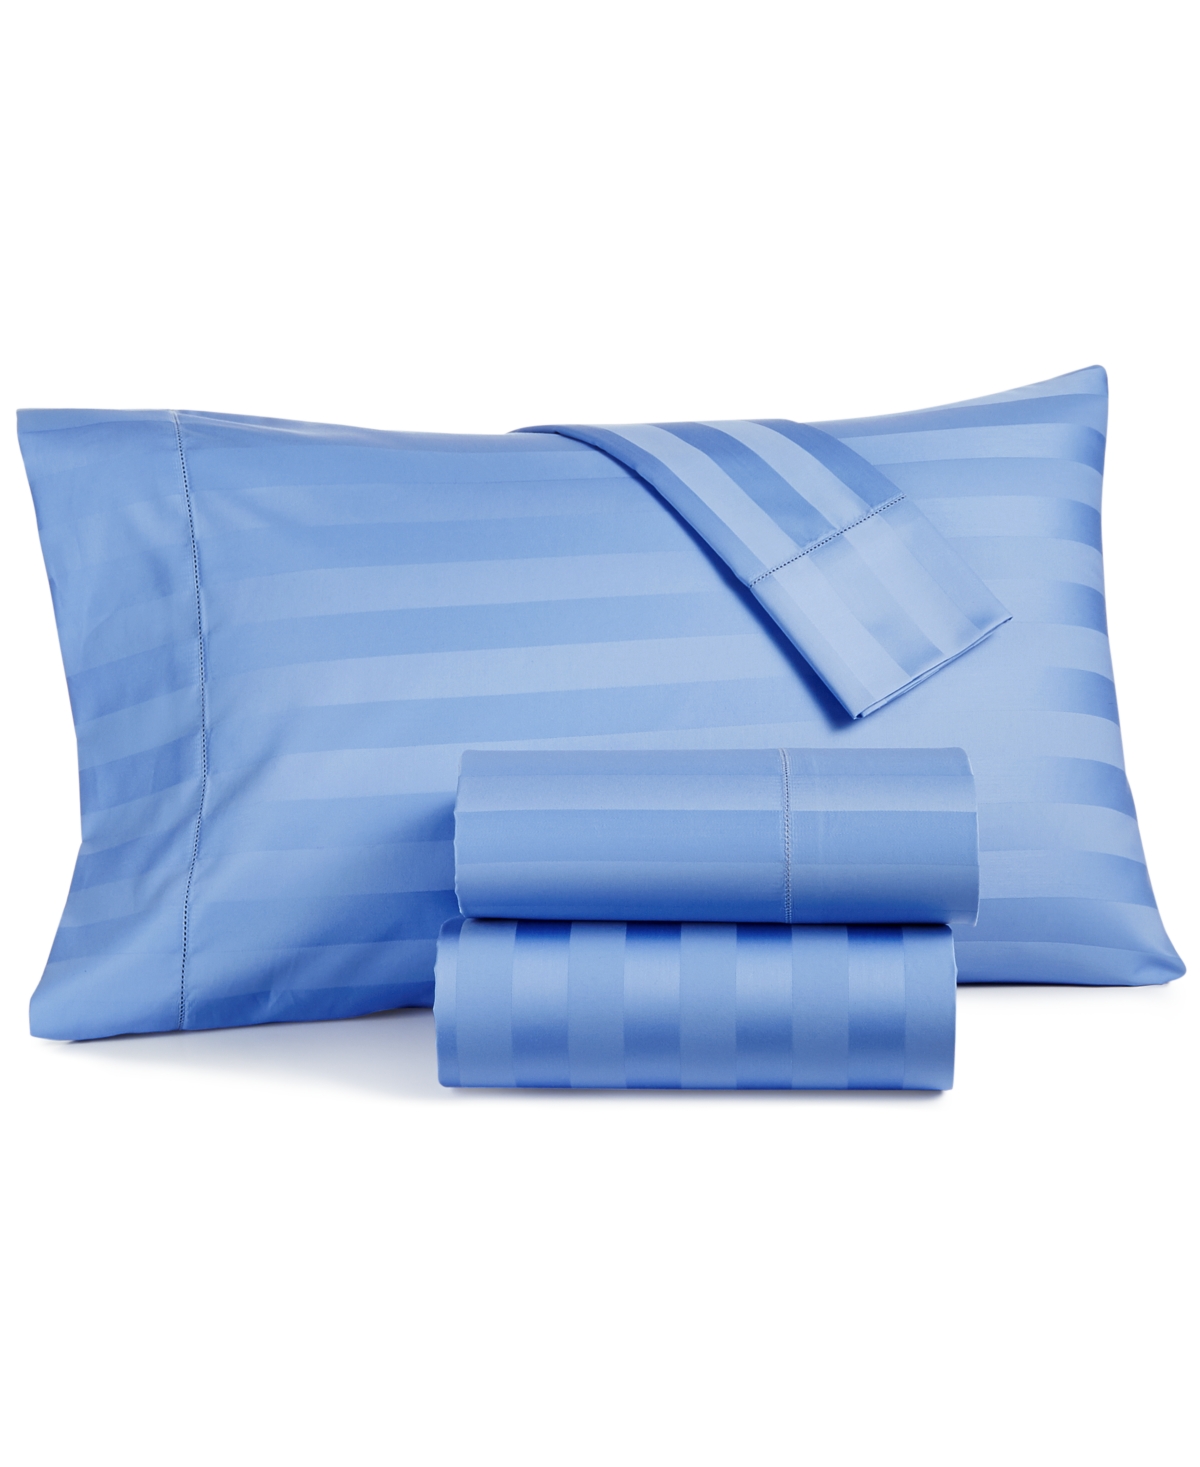 Charter Club Damask 1.5" Stripe 550 Thread Count 100% Cotton 4-pc. Sheet Set, California King, Created For Macy's In Cornflower